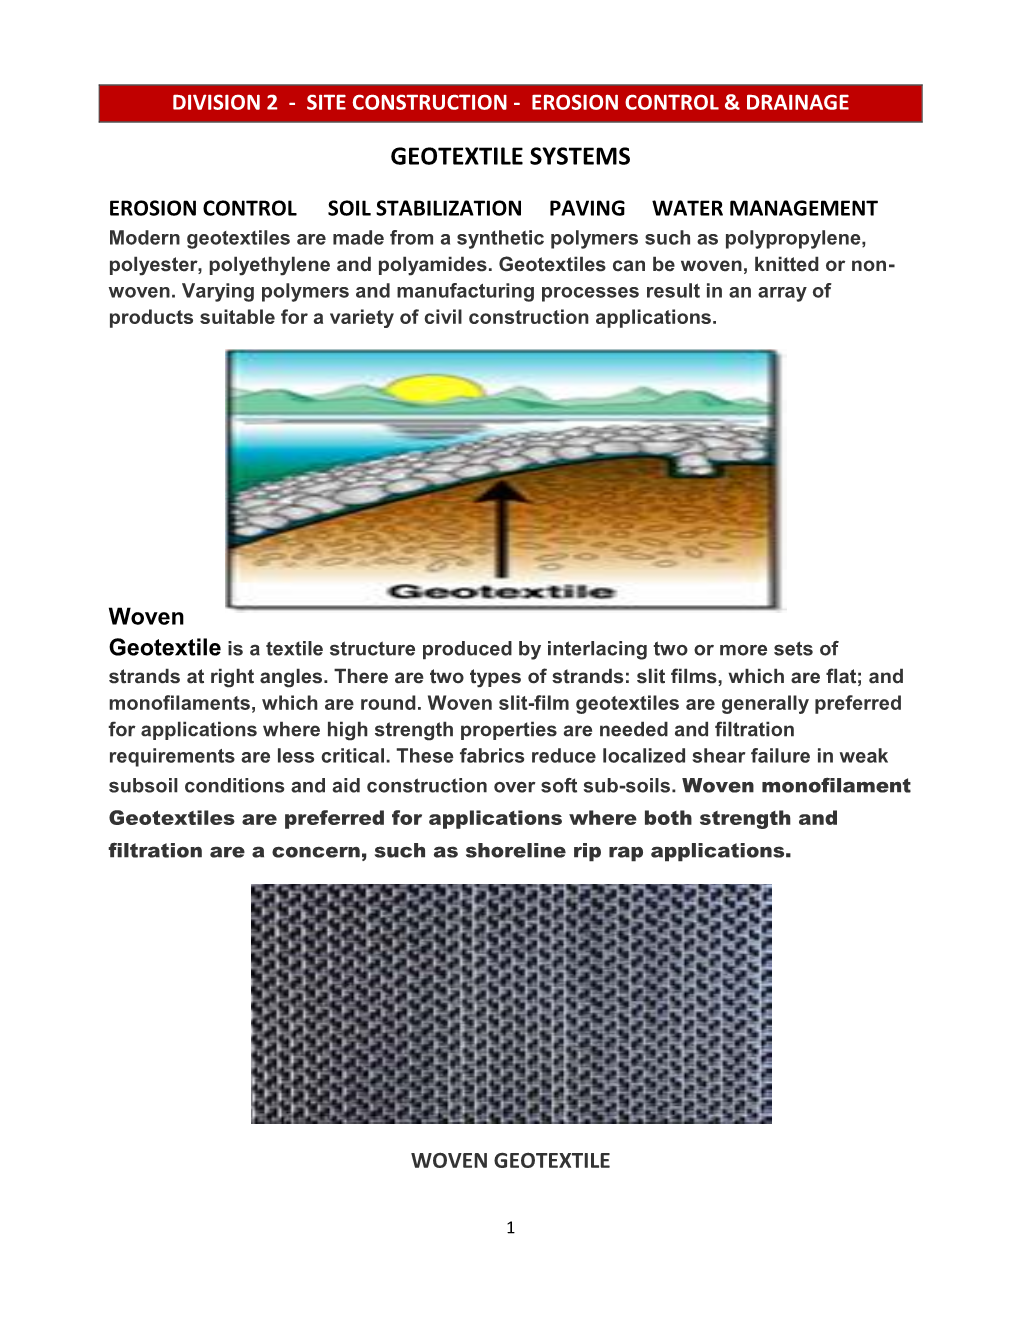 Geotextile Systems